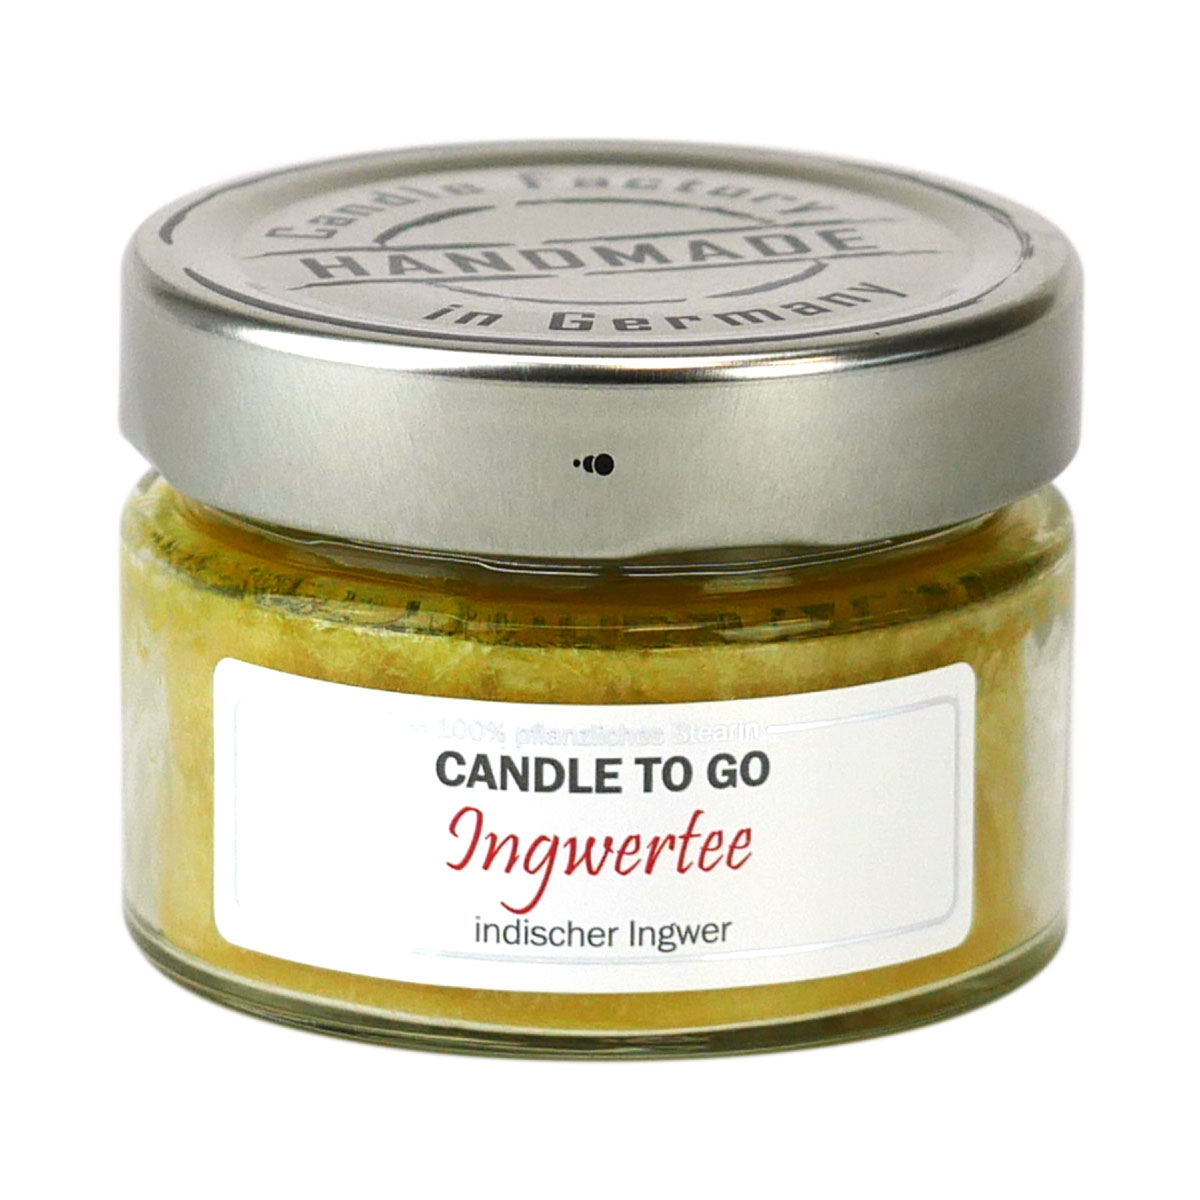 Ingwertee - Candle to Go Duftkerze von Candle Factory